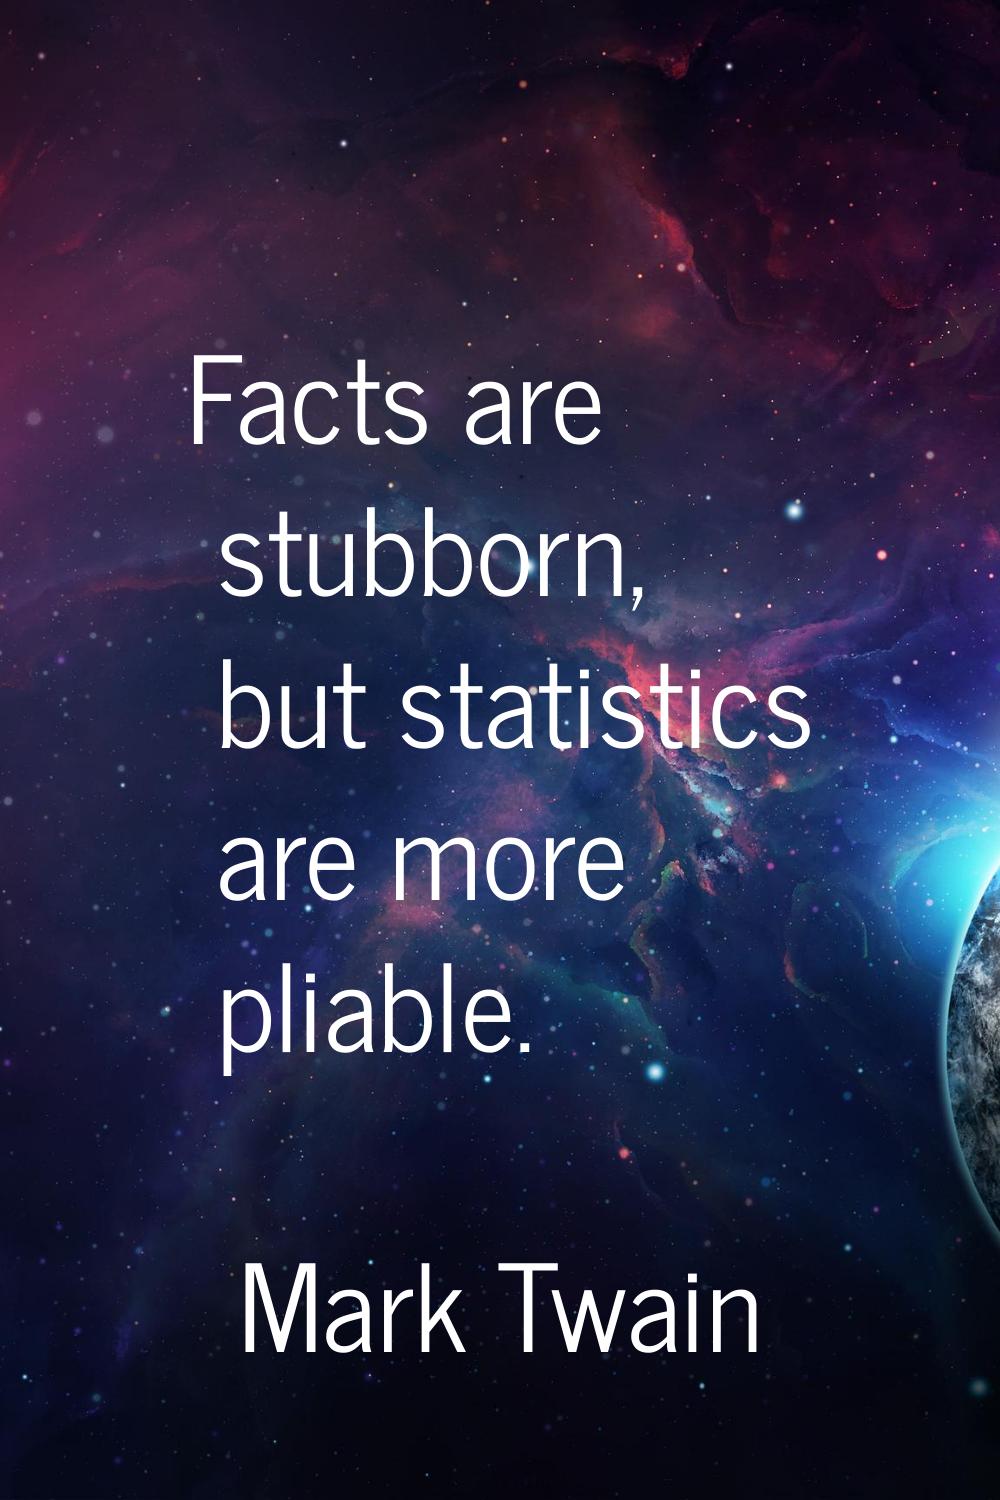 Facts are stubborn, but statistics are more pliable.